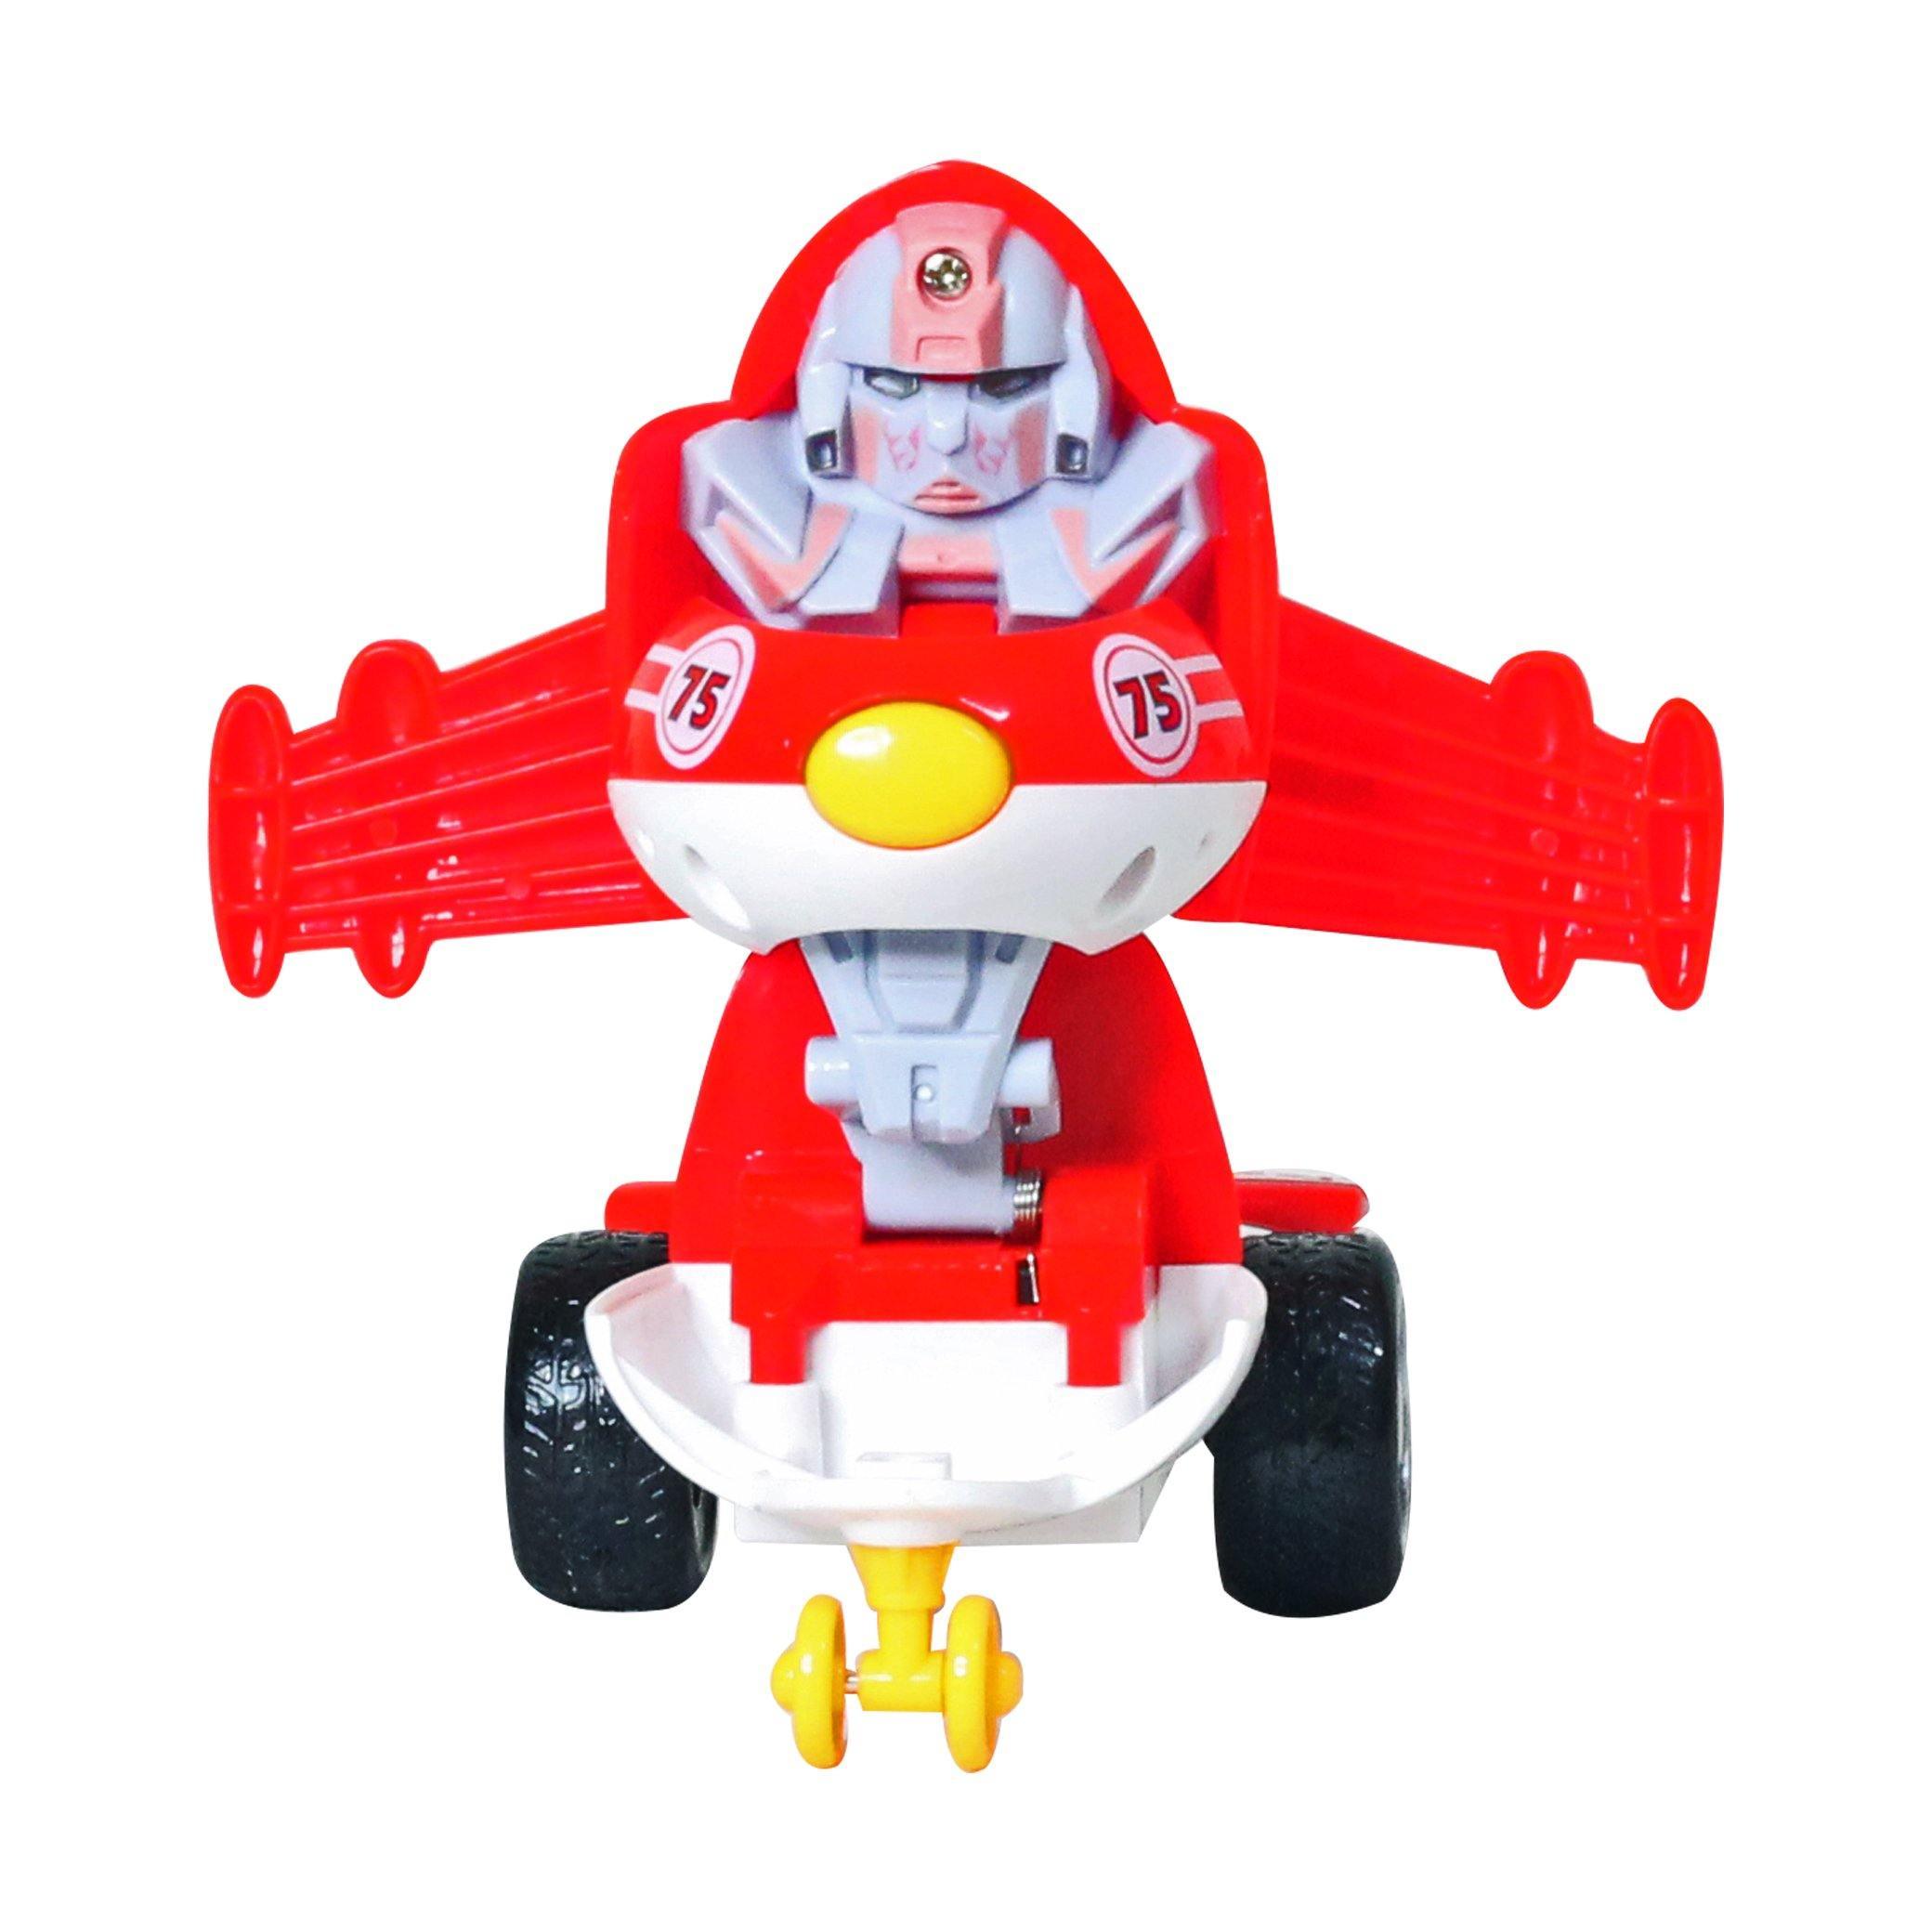 Super Wings Collide Deformation Action Figure - BumbleToys - 5-7 Years, Figures, Toy Land, Toys, Unisex